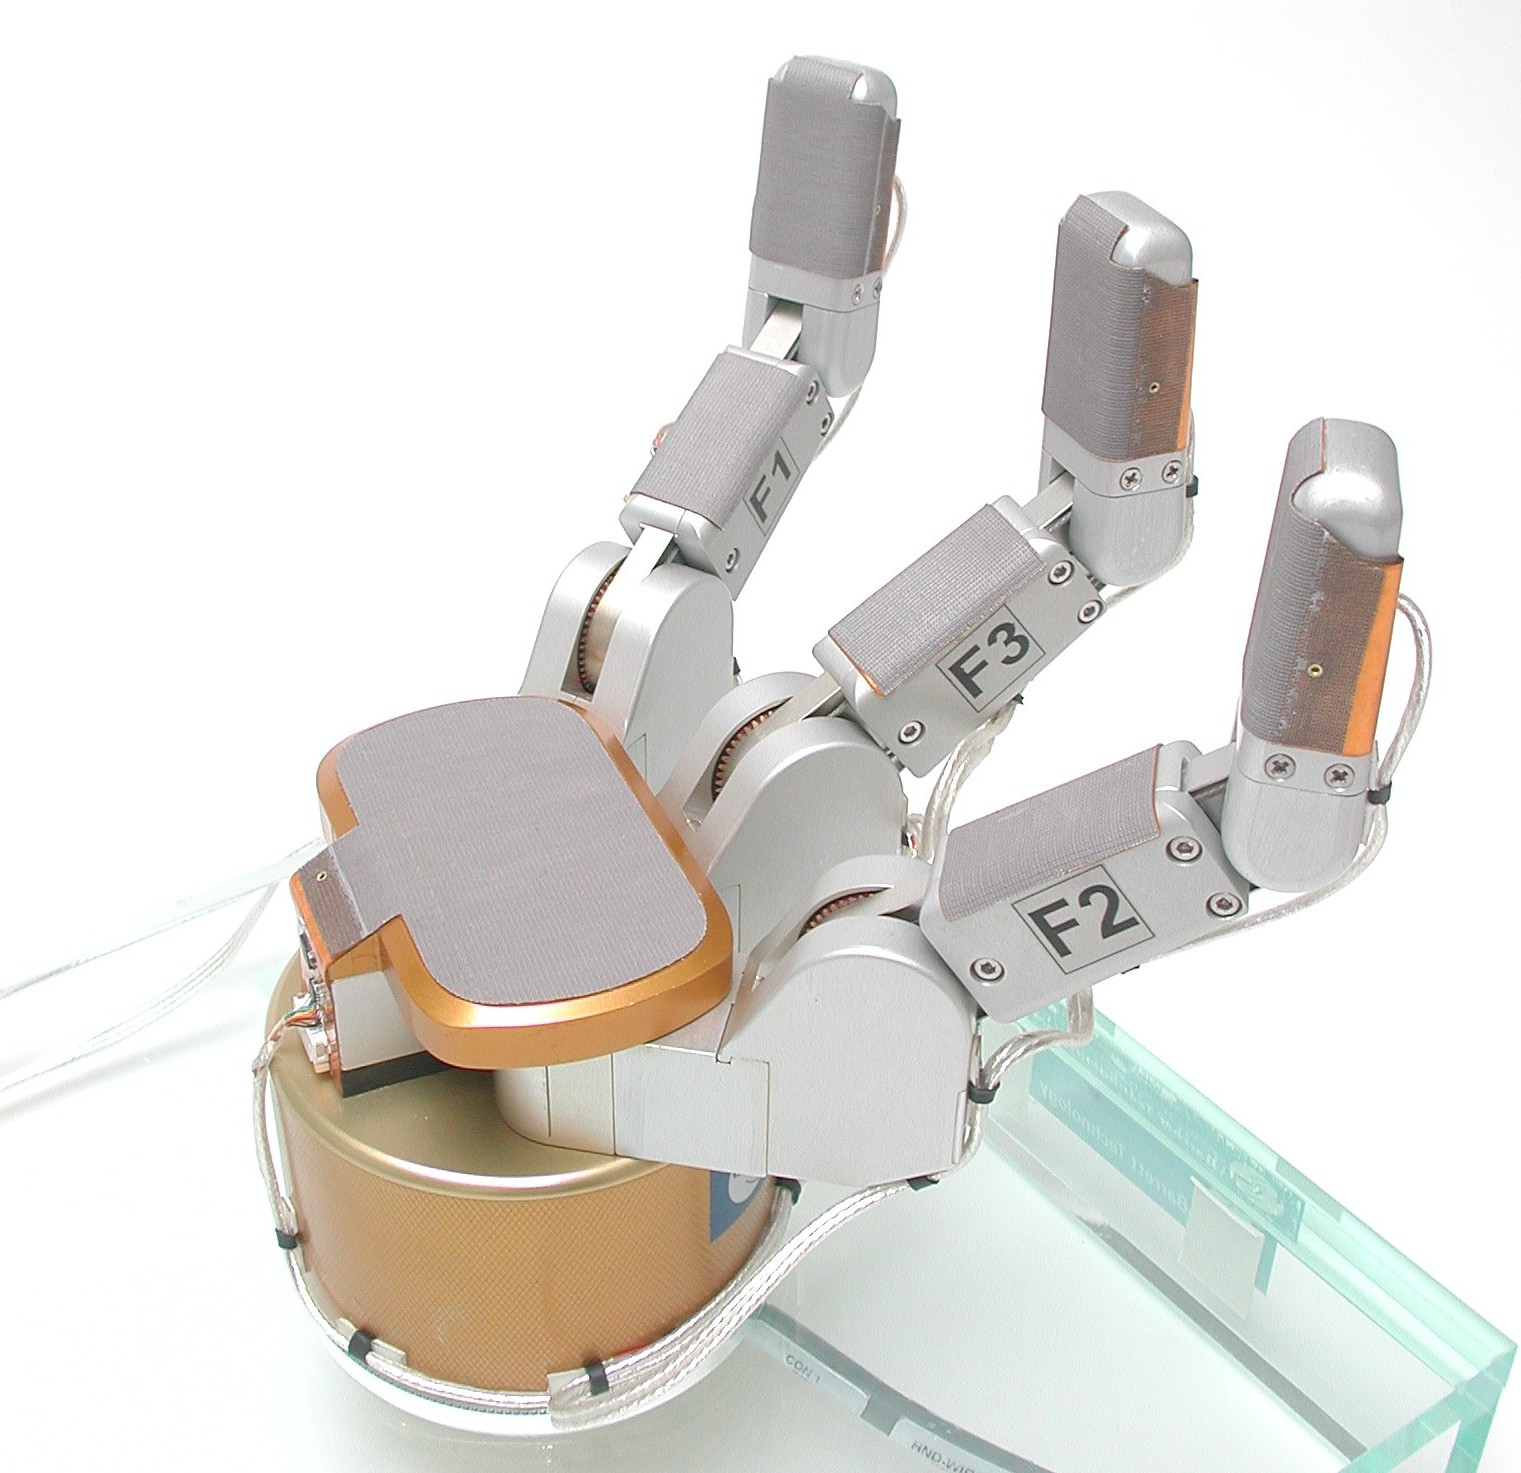 Robotic arm gripper with integrated PPS tactile sensors